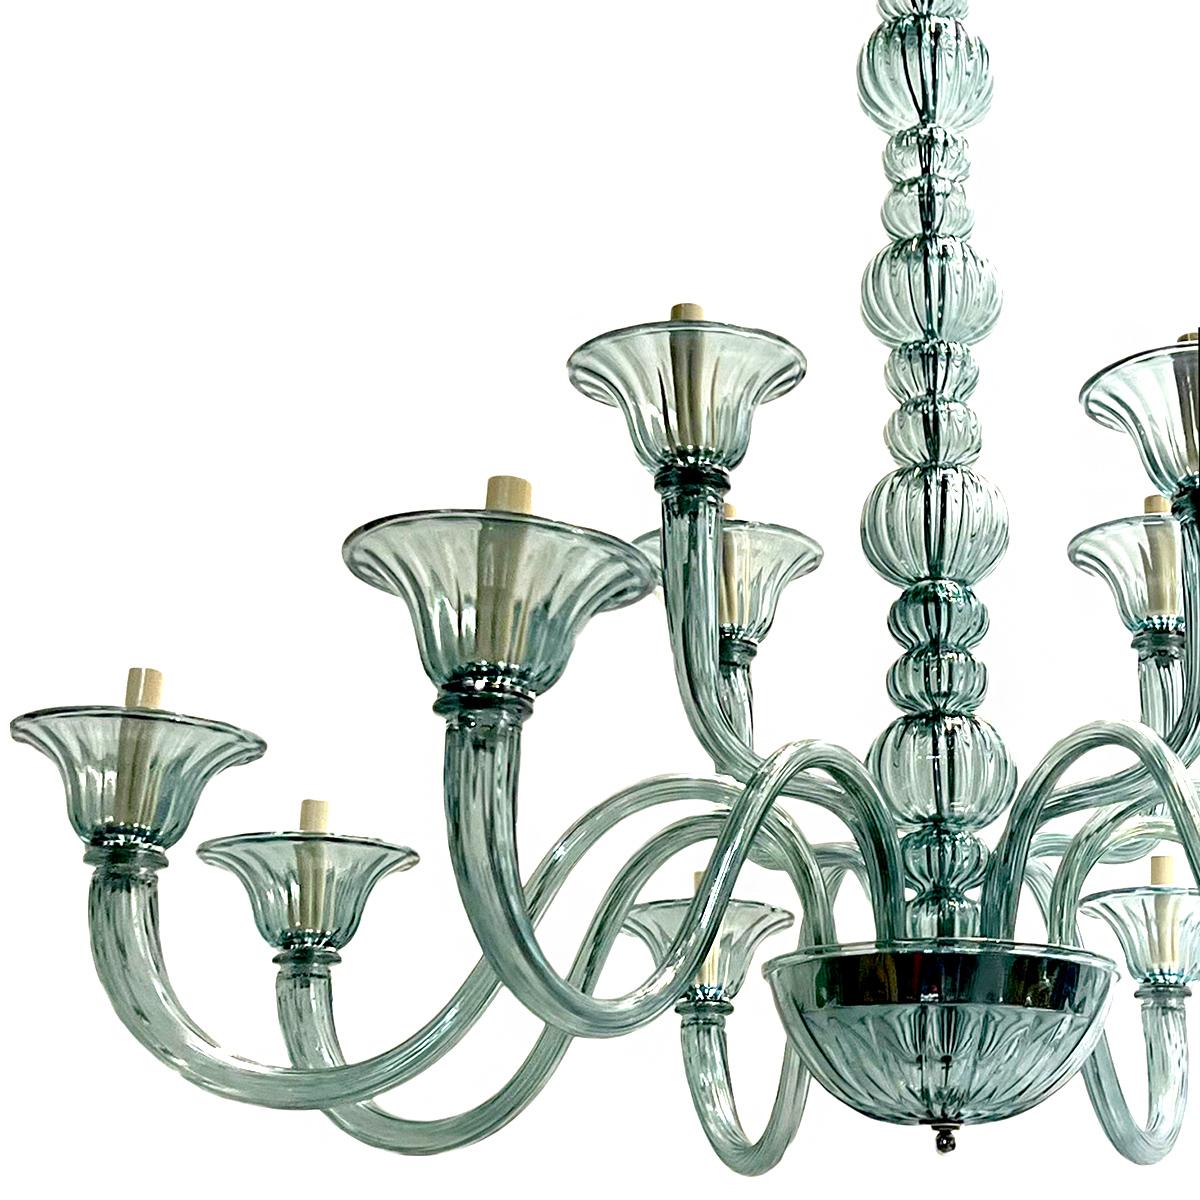 A pair of circa 1960s Italian blown glass chandeliers with 12 lights each. Sold Individually.

Measurements:
Diameter:45”
Current drop: 38” (adjustable).